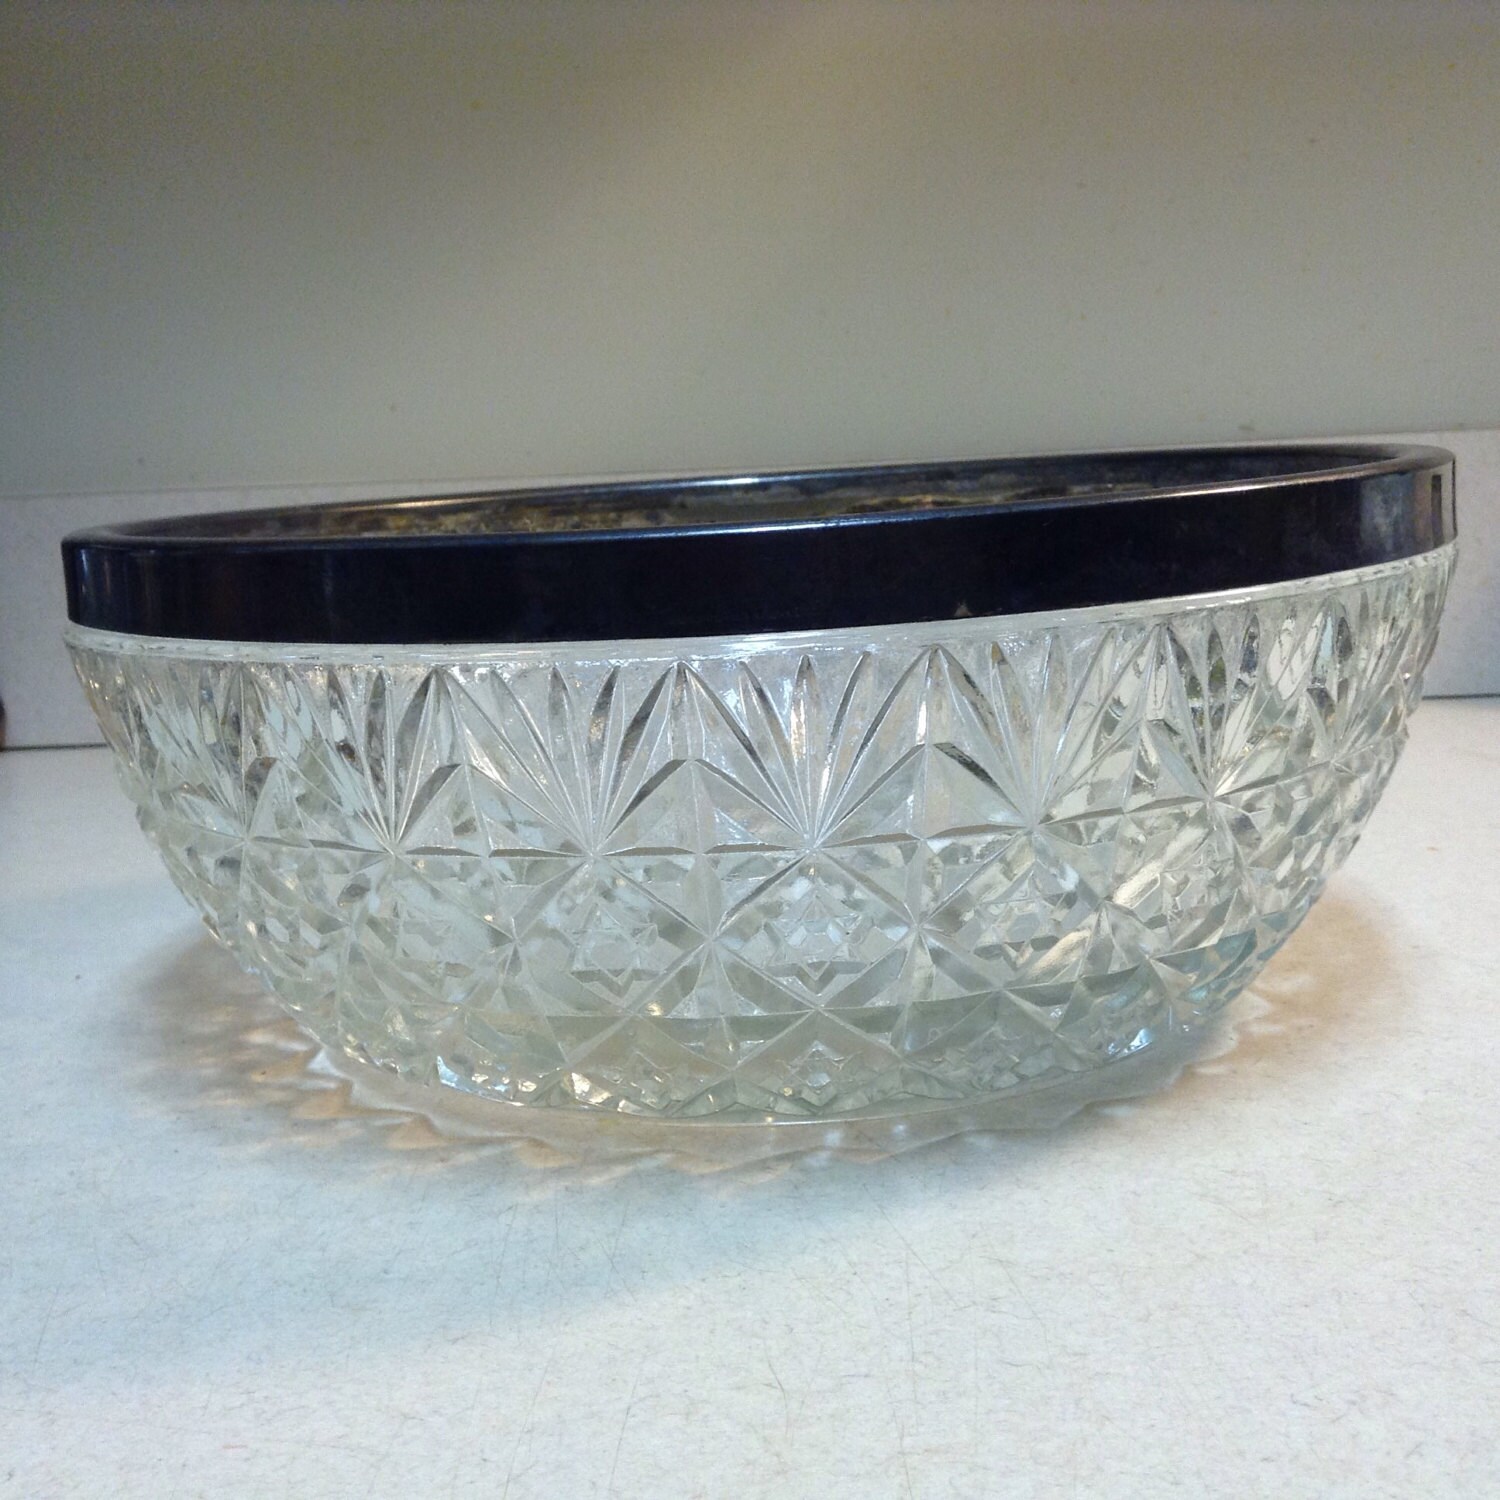 LARGE GLASS SALAD BOWL WITH A METAL RING.